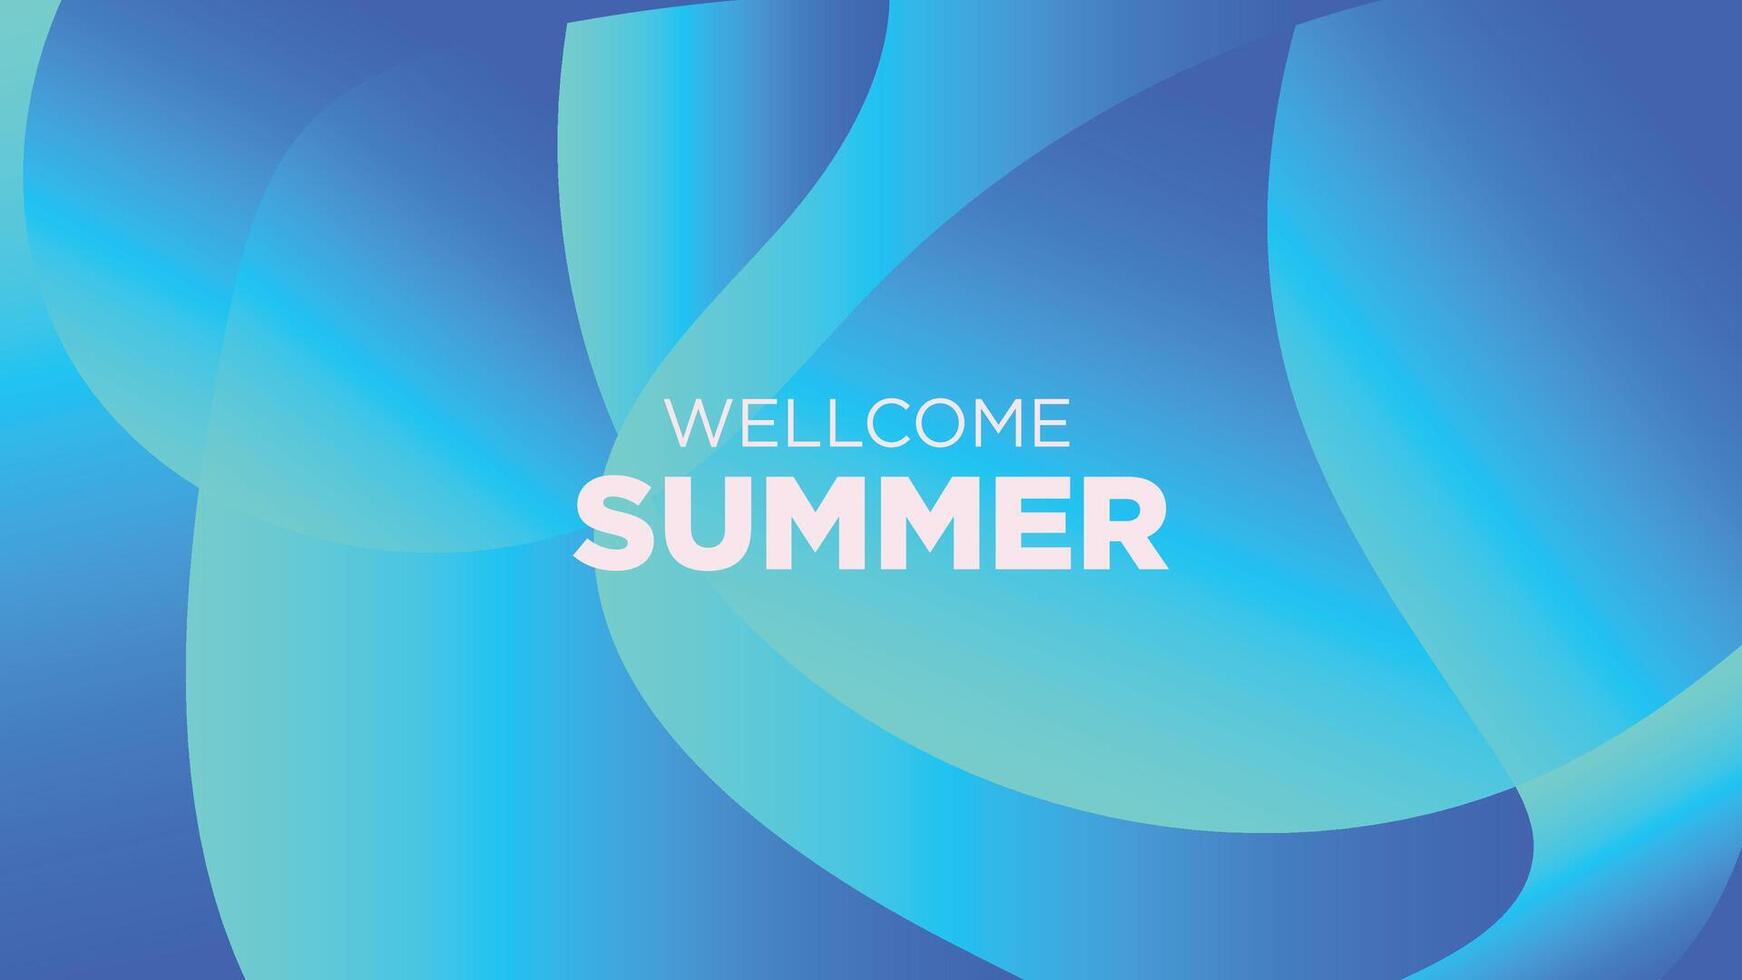 wellcome summer in abstract cold blue background vector